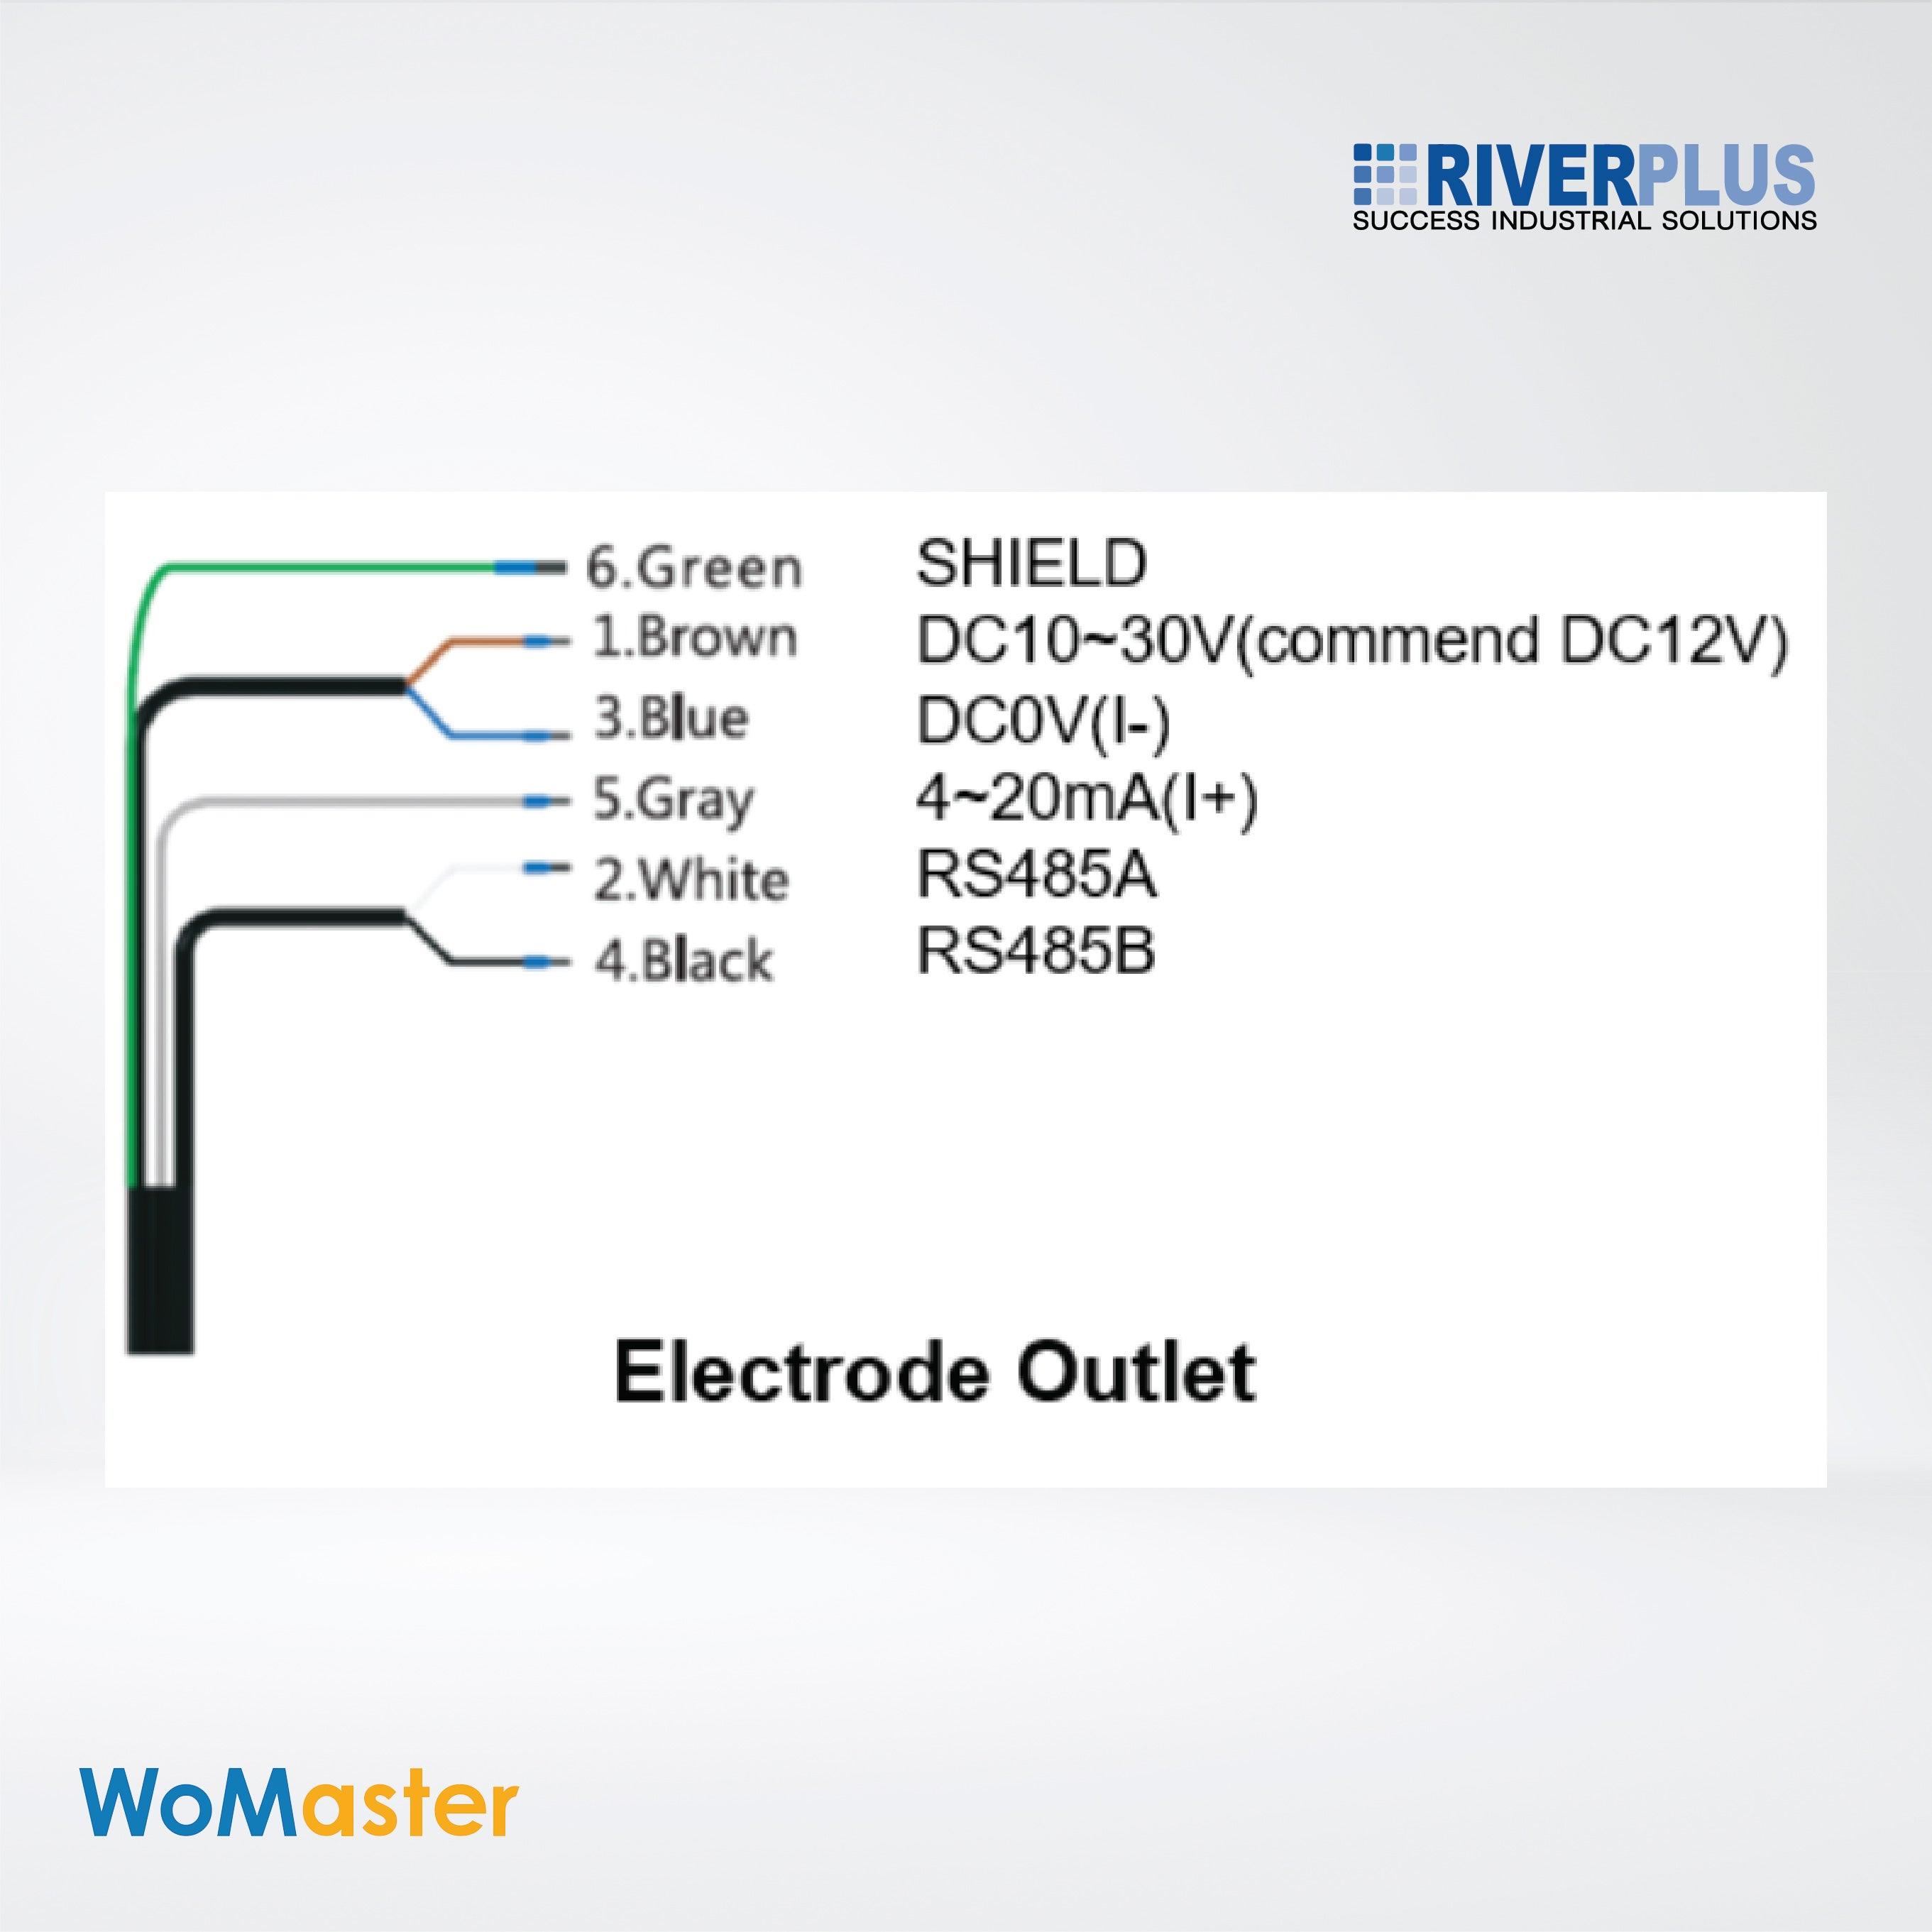 WS102-ORP Modbus Water Oxidation Reduction Potential (ORP) Sensor - Riverplus